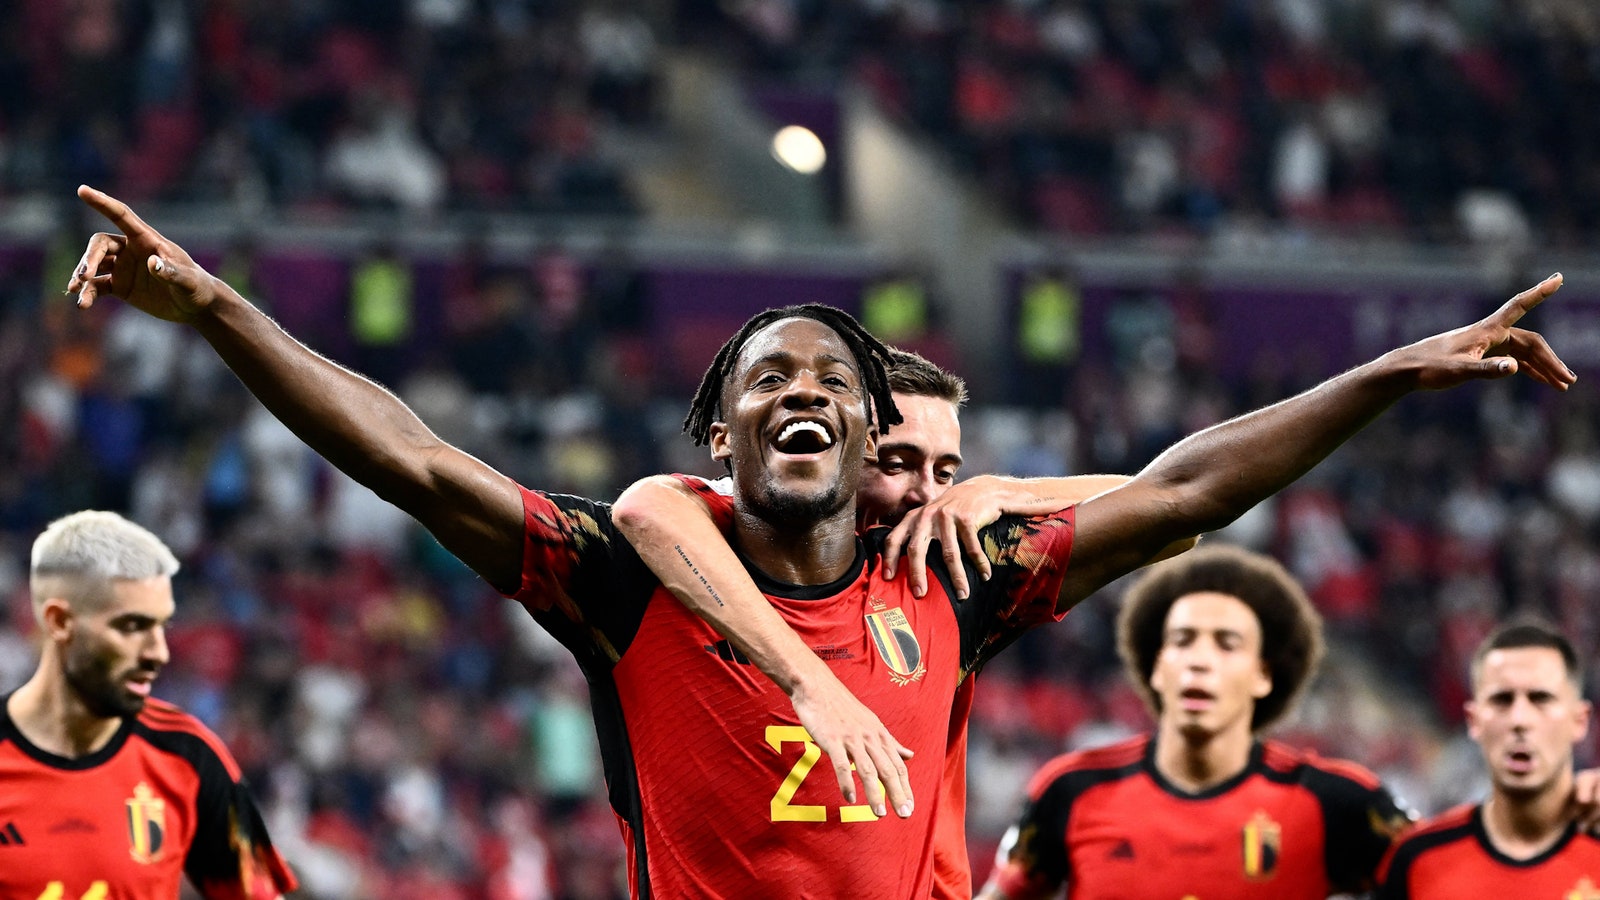 Belgium's Michy Batshuayi scored against Canada in the 44th minute.